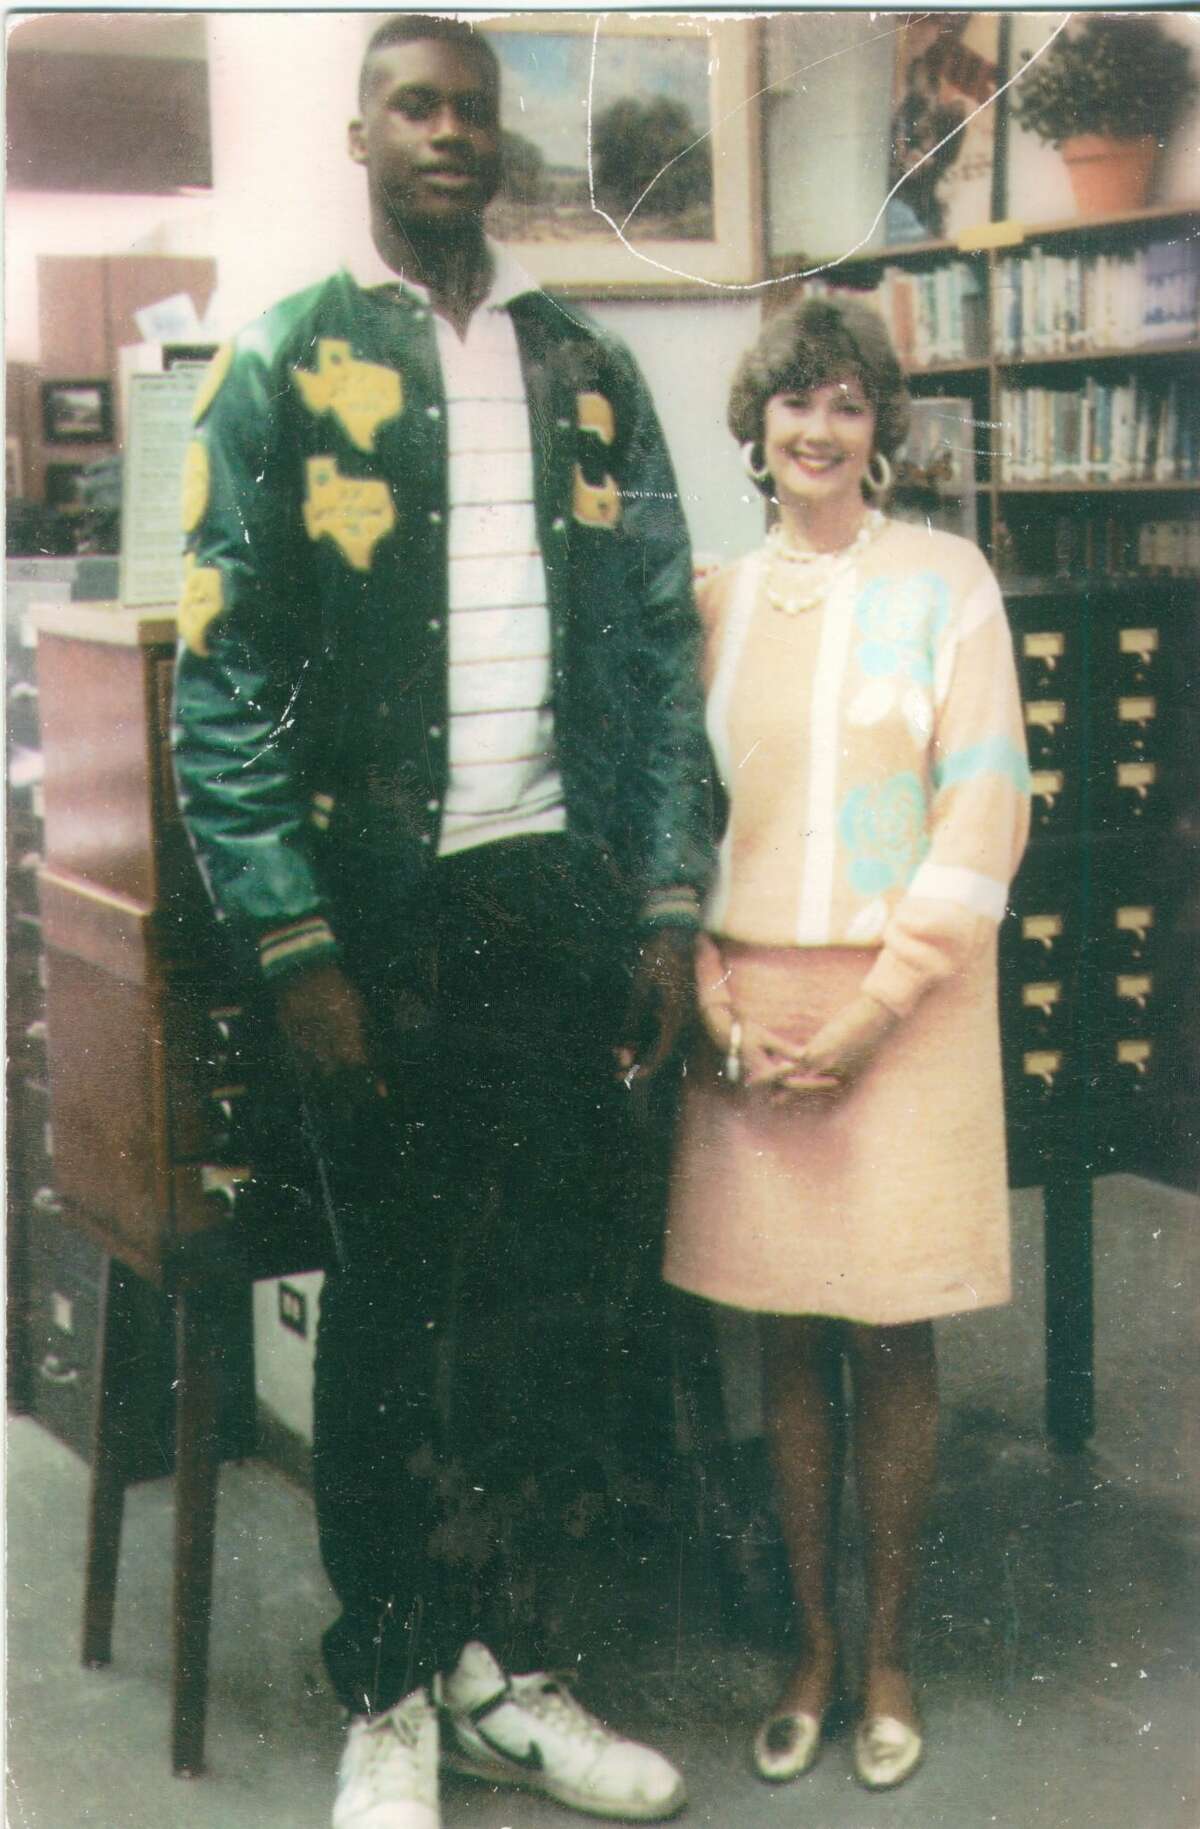 In 1989, shortly after the Cole High School boys basketball team posted a 36-0 record and won the 3A State Championship, Shaquille O'Neal posed with librarian Sandee Mewhinney. "I knew Shaquille would go far in his basketball career," she writes, "so I wanted a picture with him."